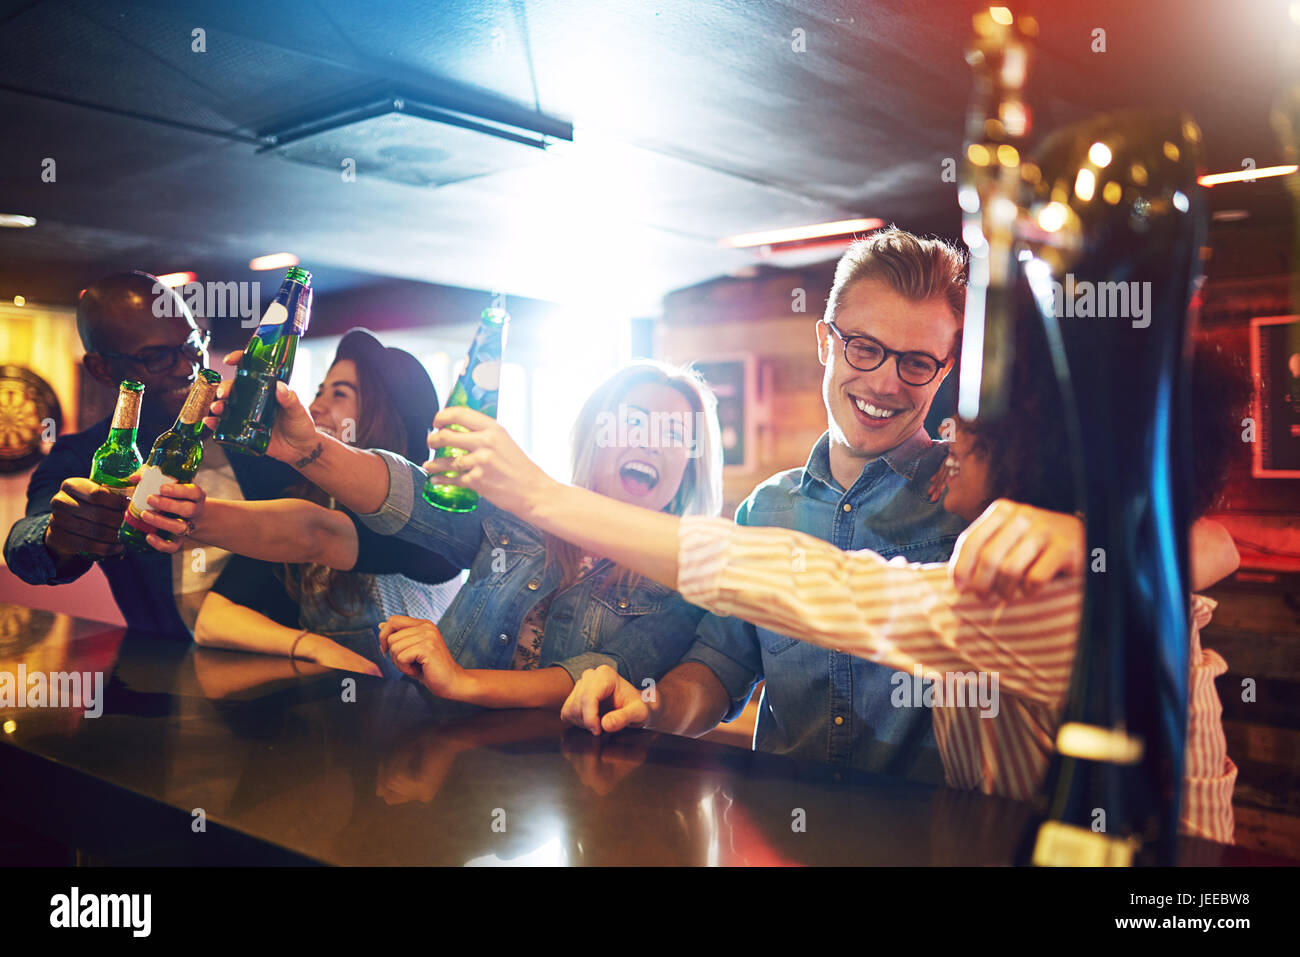 Laughing people holding up the beer bottles in the bar. Friends and fun concept. Stock Photo